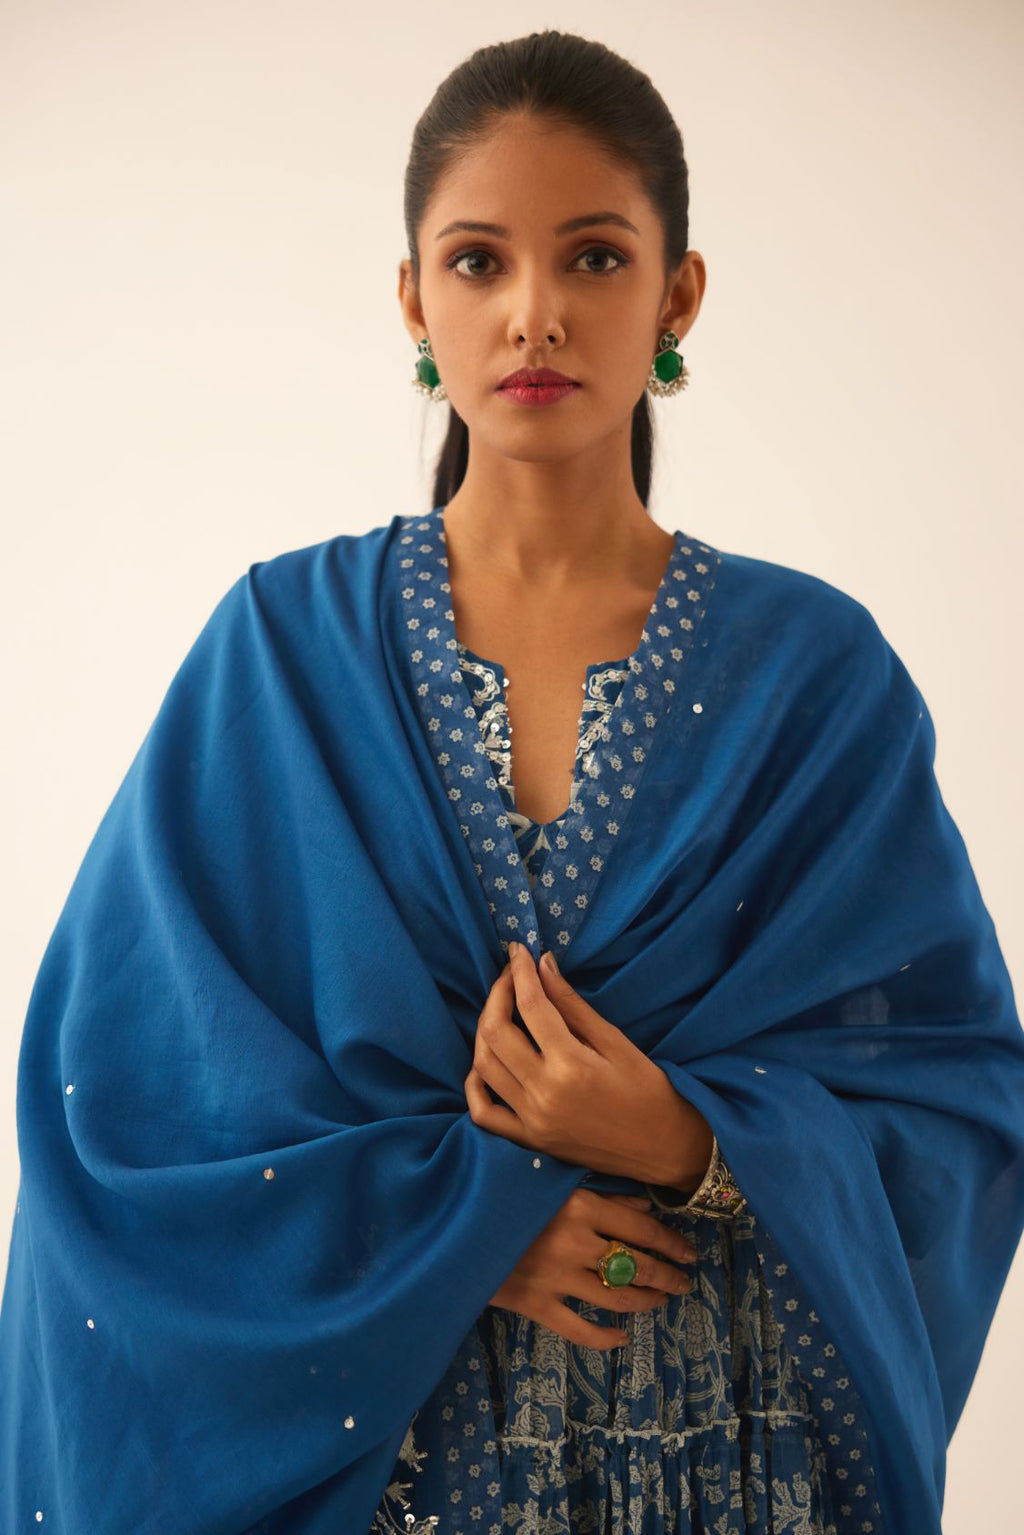 Blue hand block printed multi-tiered kurta dress set with 3/4 sleeves, highlighted with sequins, tassels and bead work.